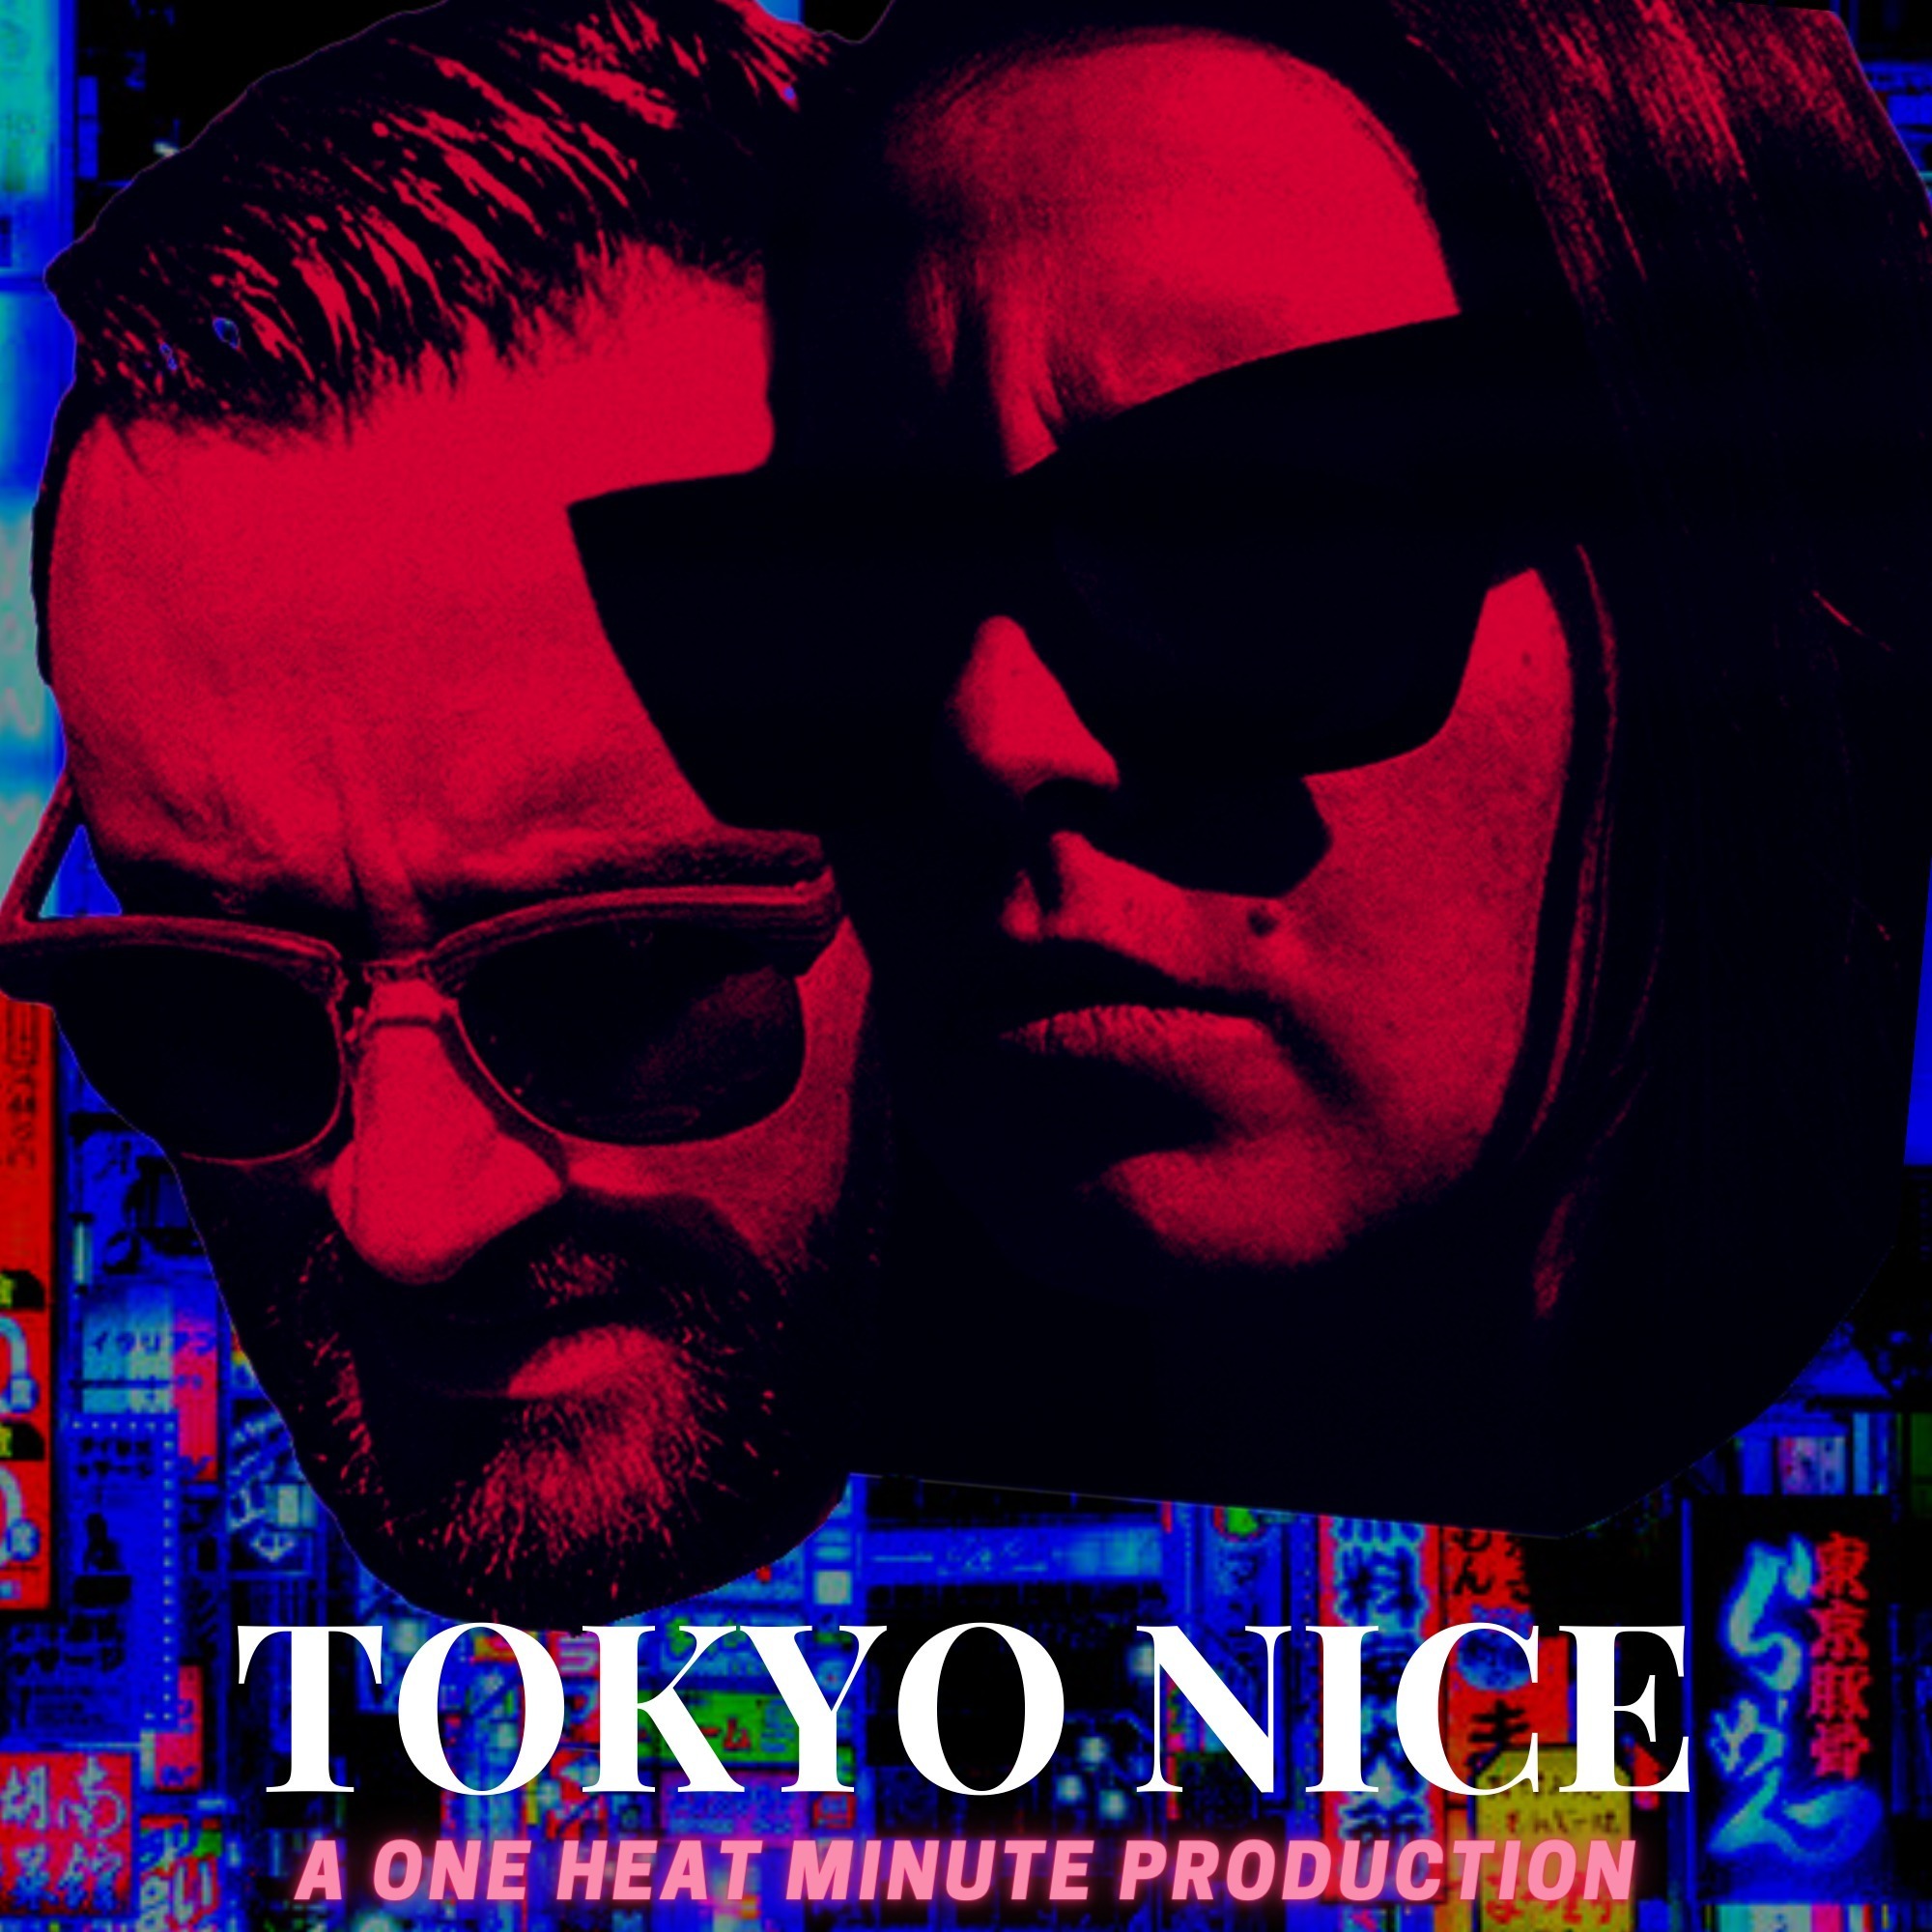 TOKYO NICE: Episode Four “I Want It That Way” & Episode Five 